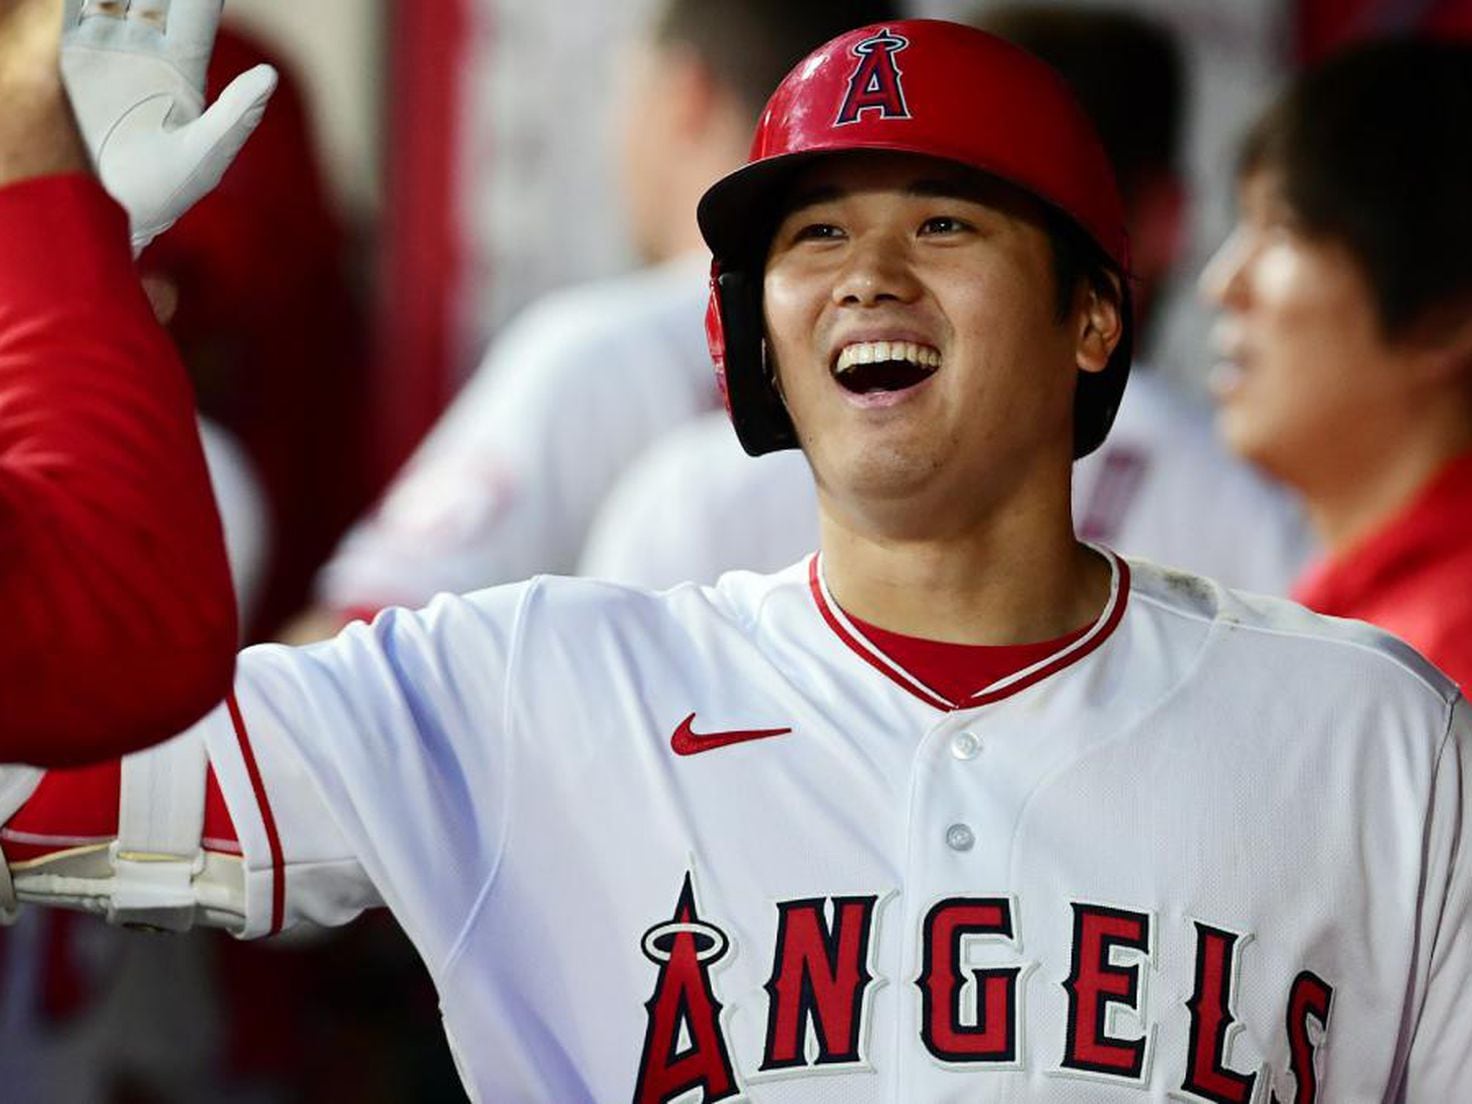 NY Yankees' 13-game winning streak snapped as Ohtani makes history - AS USA